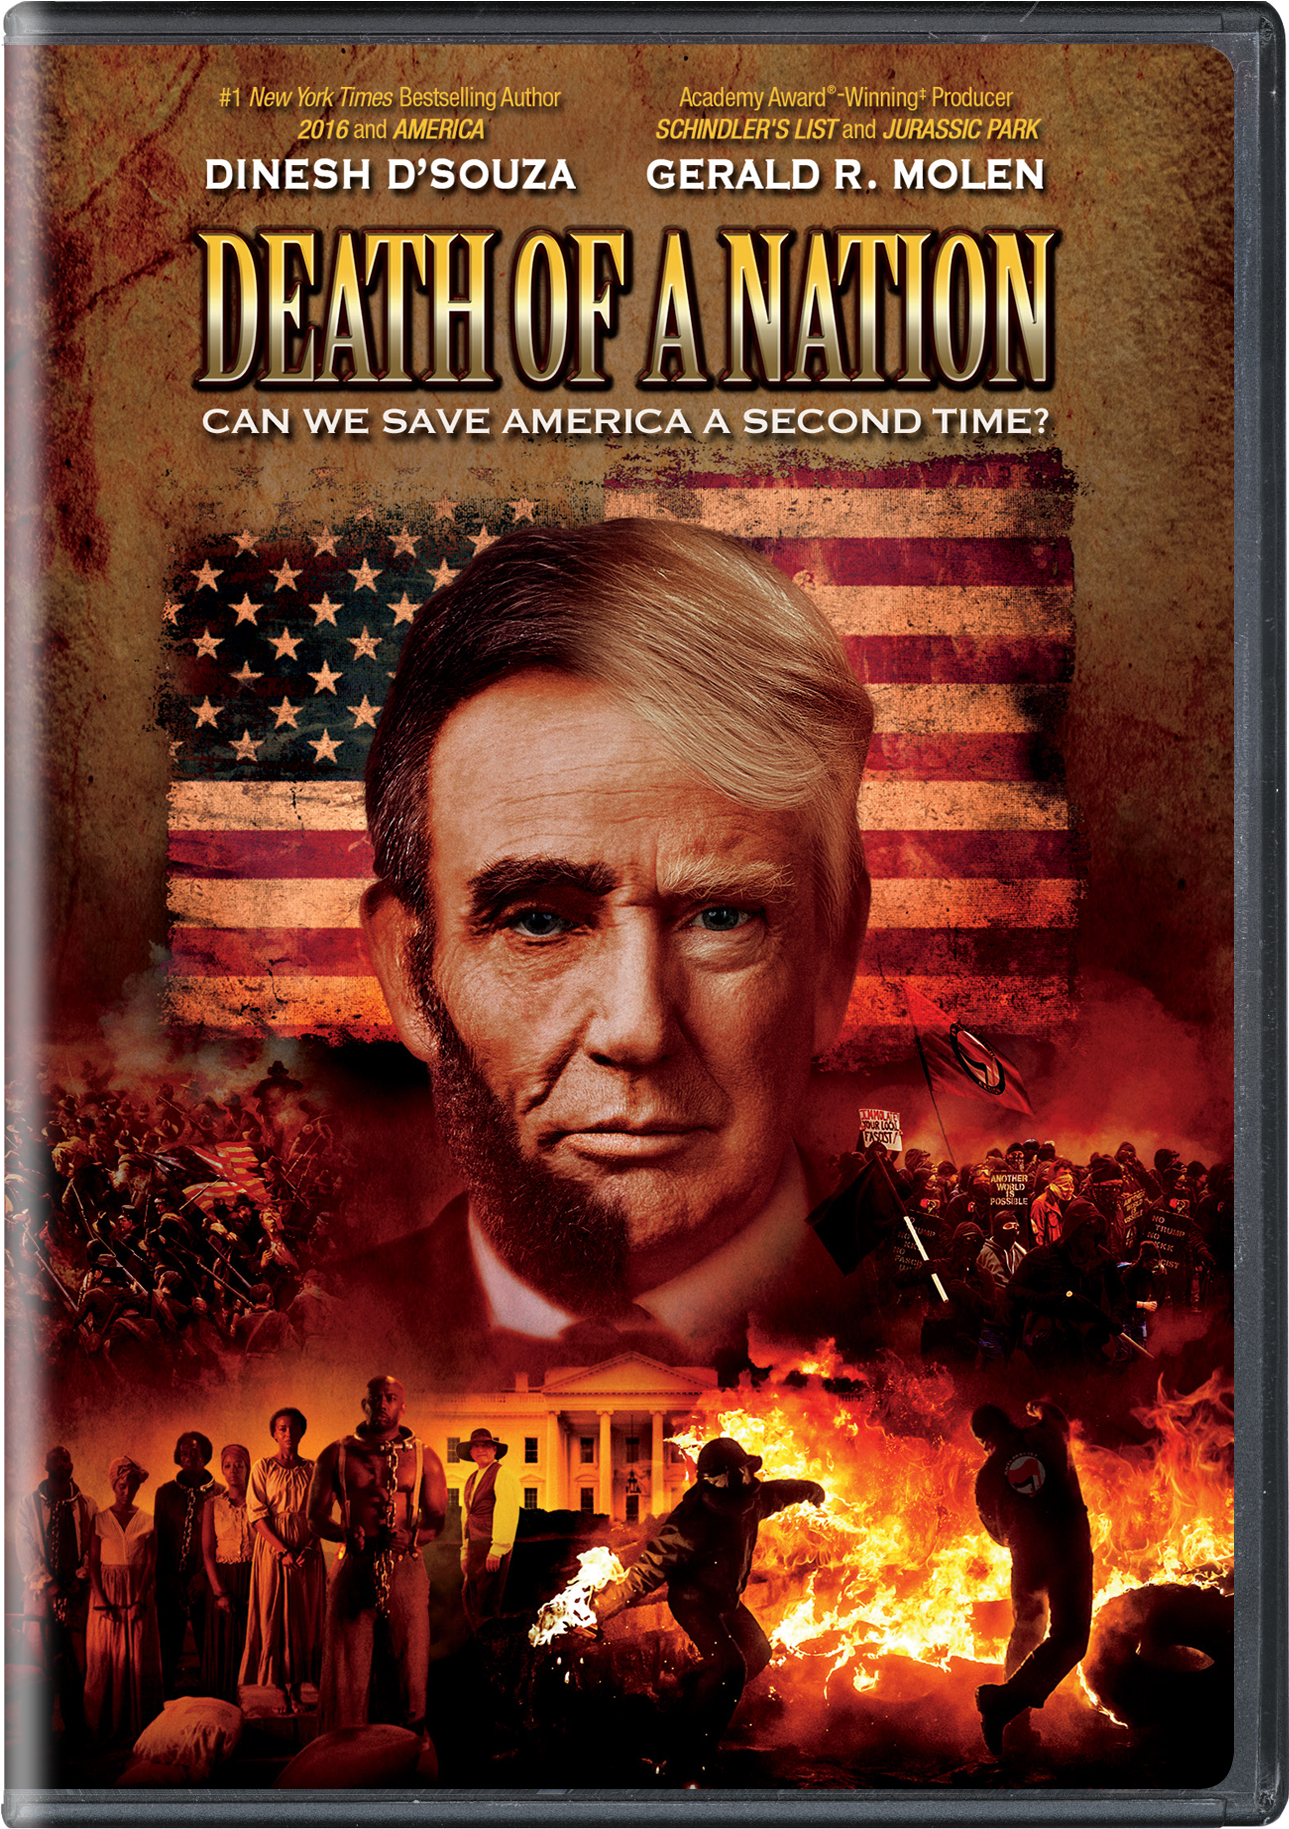 Death Of A Nation - DVD [ 2018 ]  - Documentaries On DVD